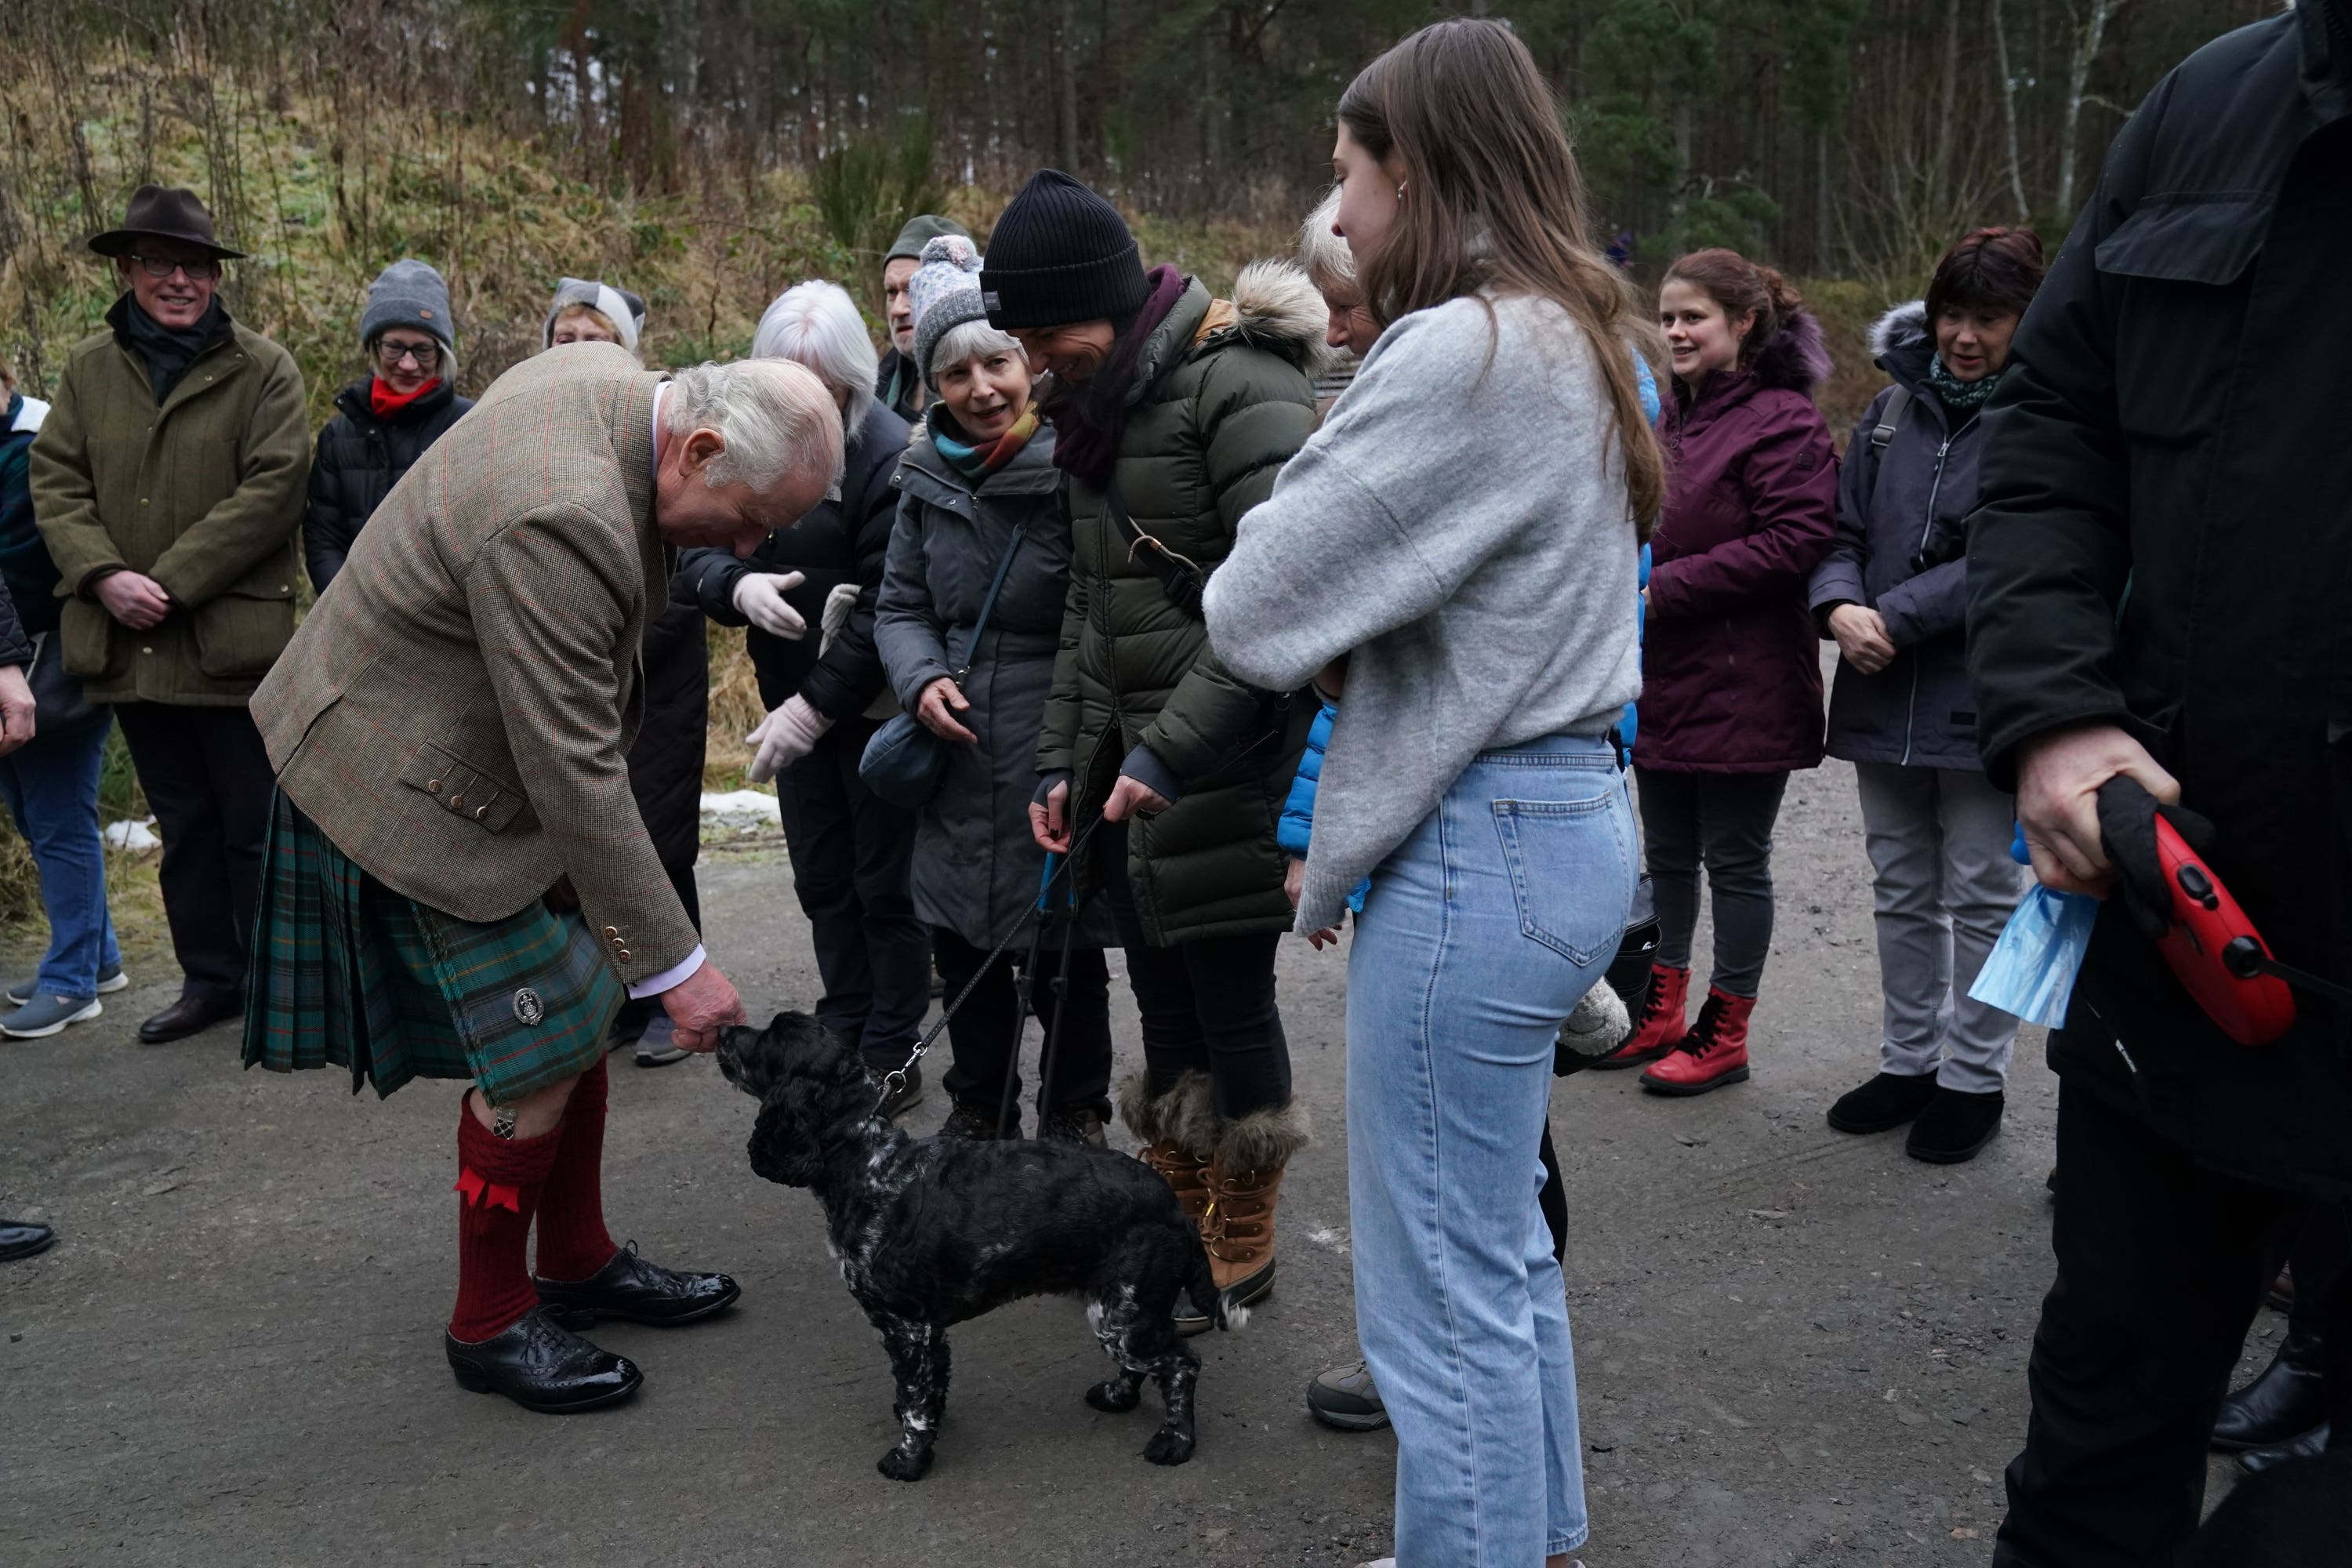 Charles met with well-wishers, and their pets, outside the community facility